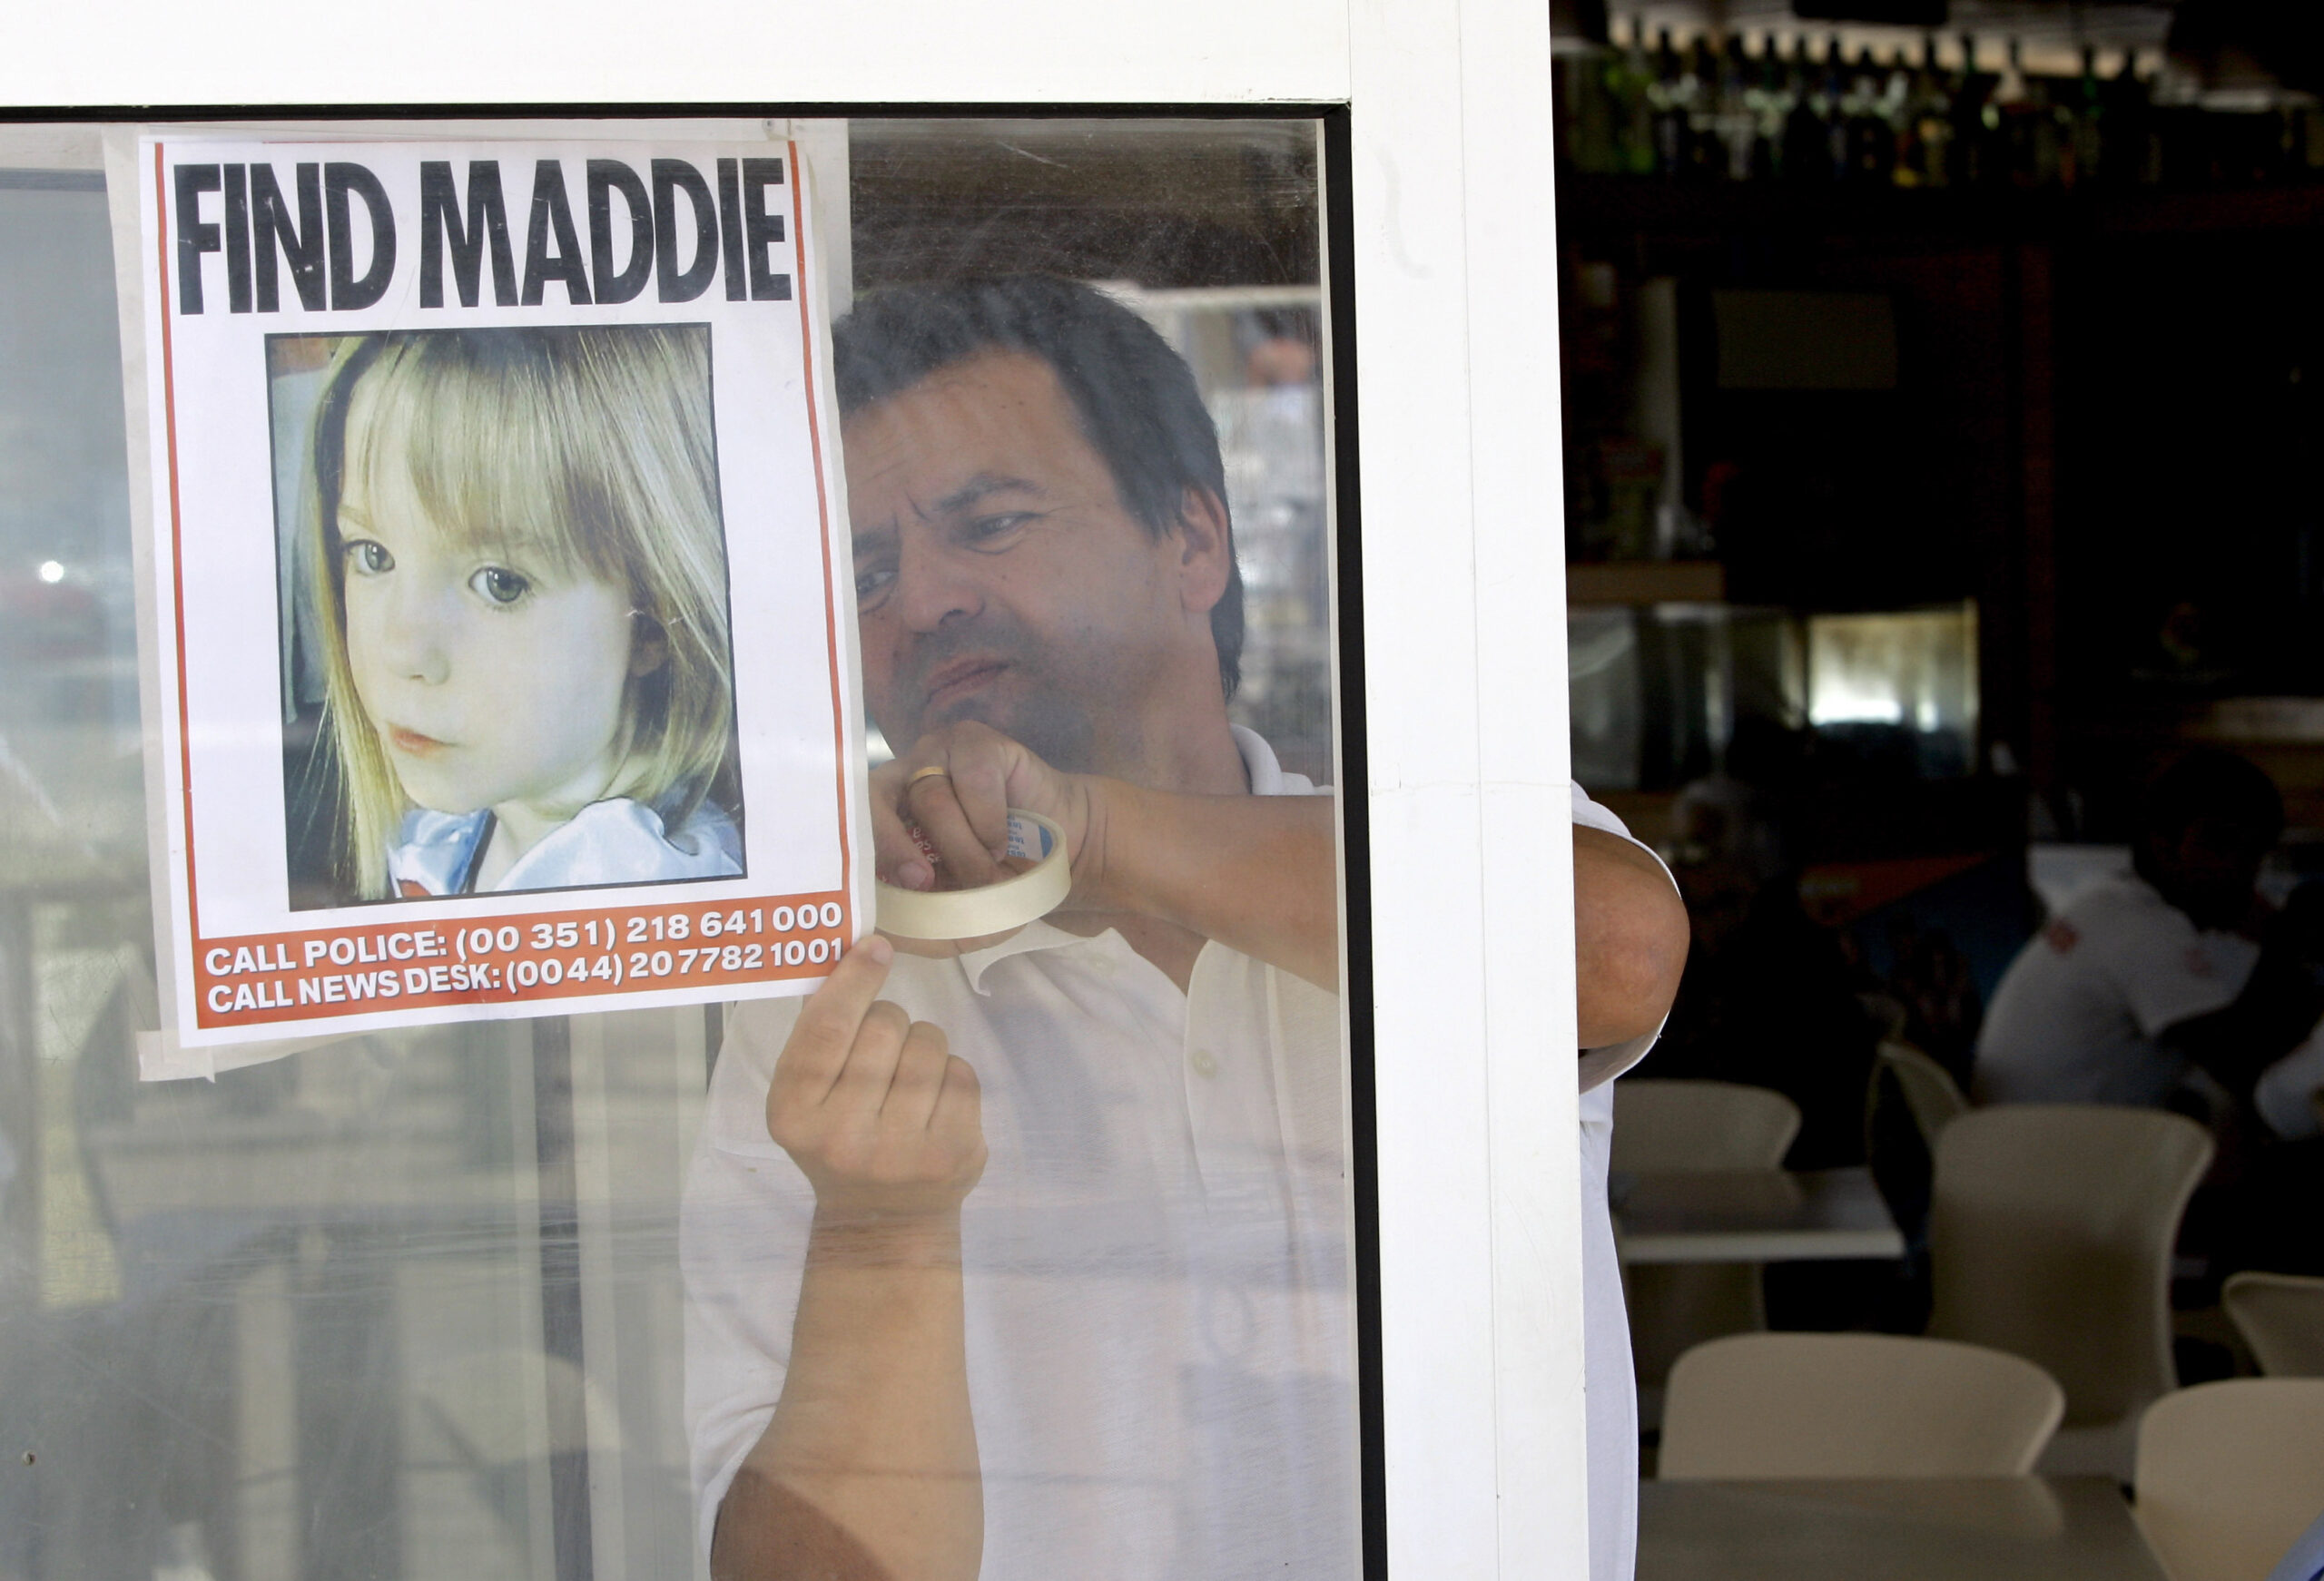 FILE - A waiter hangs a picture of missing 3-year-old girl Madeleine McCann on a restaurant's window, Thursday, May 10 2007, in Praia da Luz, southern Portugal. Prosecutors in southern Portugal are formally accusing a suspect in the investigation into the disappearance of Madeleine McCann, a British girl who disappeared nearly 15 years ago while on a family vacation in the southern European country. A statement on Thursday, April 21, 2022, by the Public Ministry district of Faro, the largest city in Portugal's Algarve region, did not name the suspect but said they were acting on a request by German authorities and in coordination with English investigators. (AP Photo/Armando Franca, File)